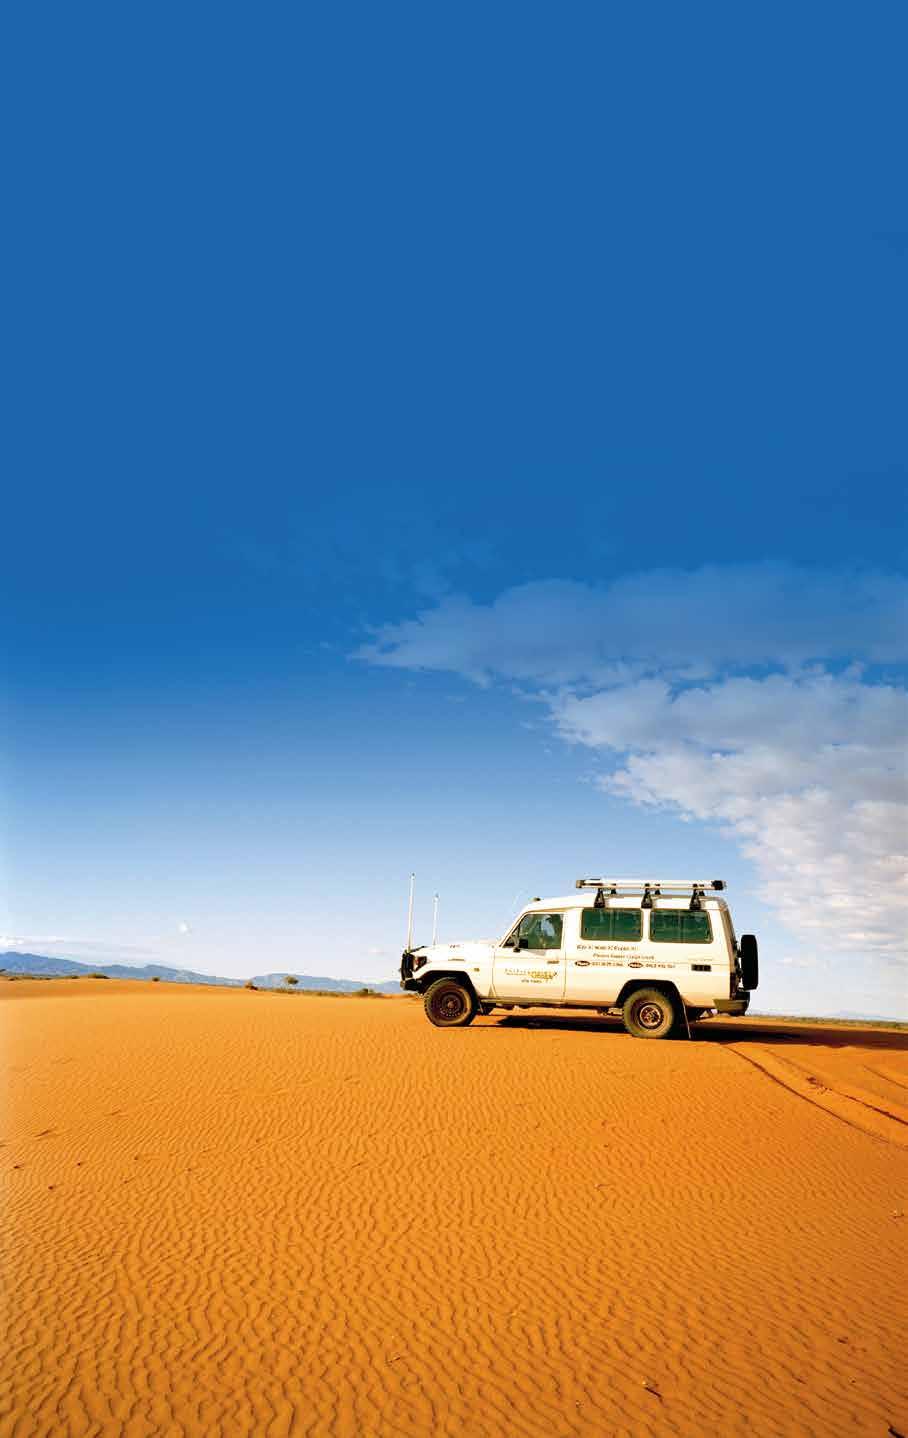 Discover South Australia through Self-Drive Journeys Accommodation (Room Only) Car Rental & GPS Touring as per itinerary From coastal journeys and outback adventures, an Aussie road trip is one of